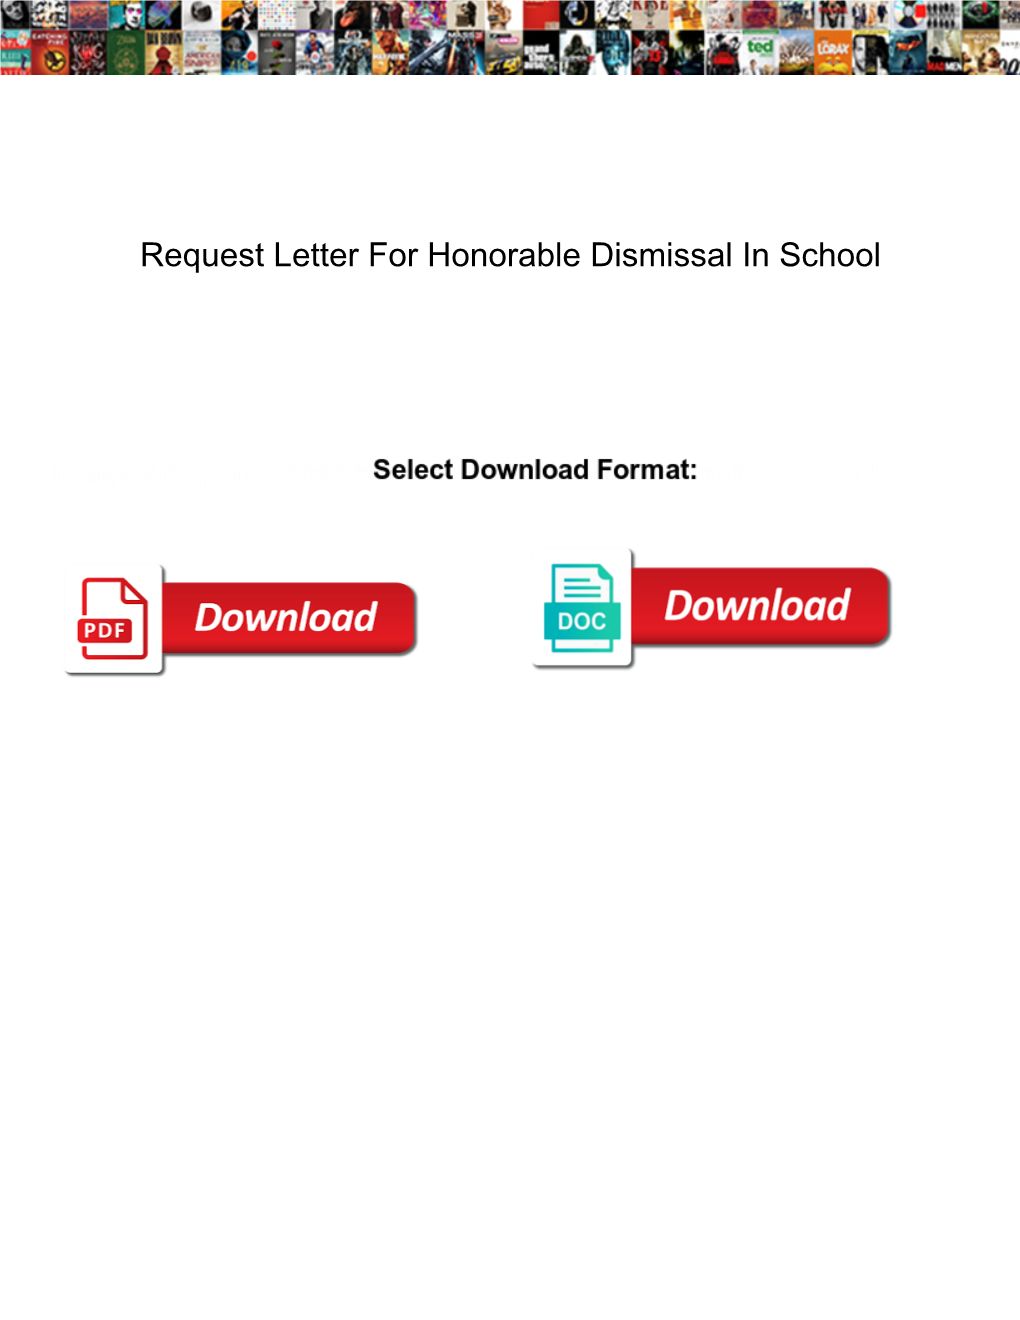 Request Letter for Honorable Dismissal in School